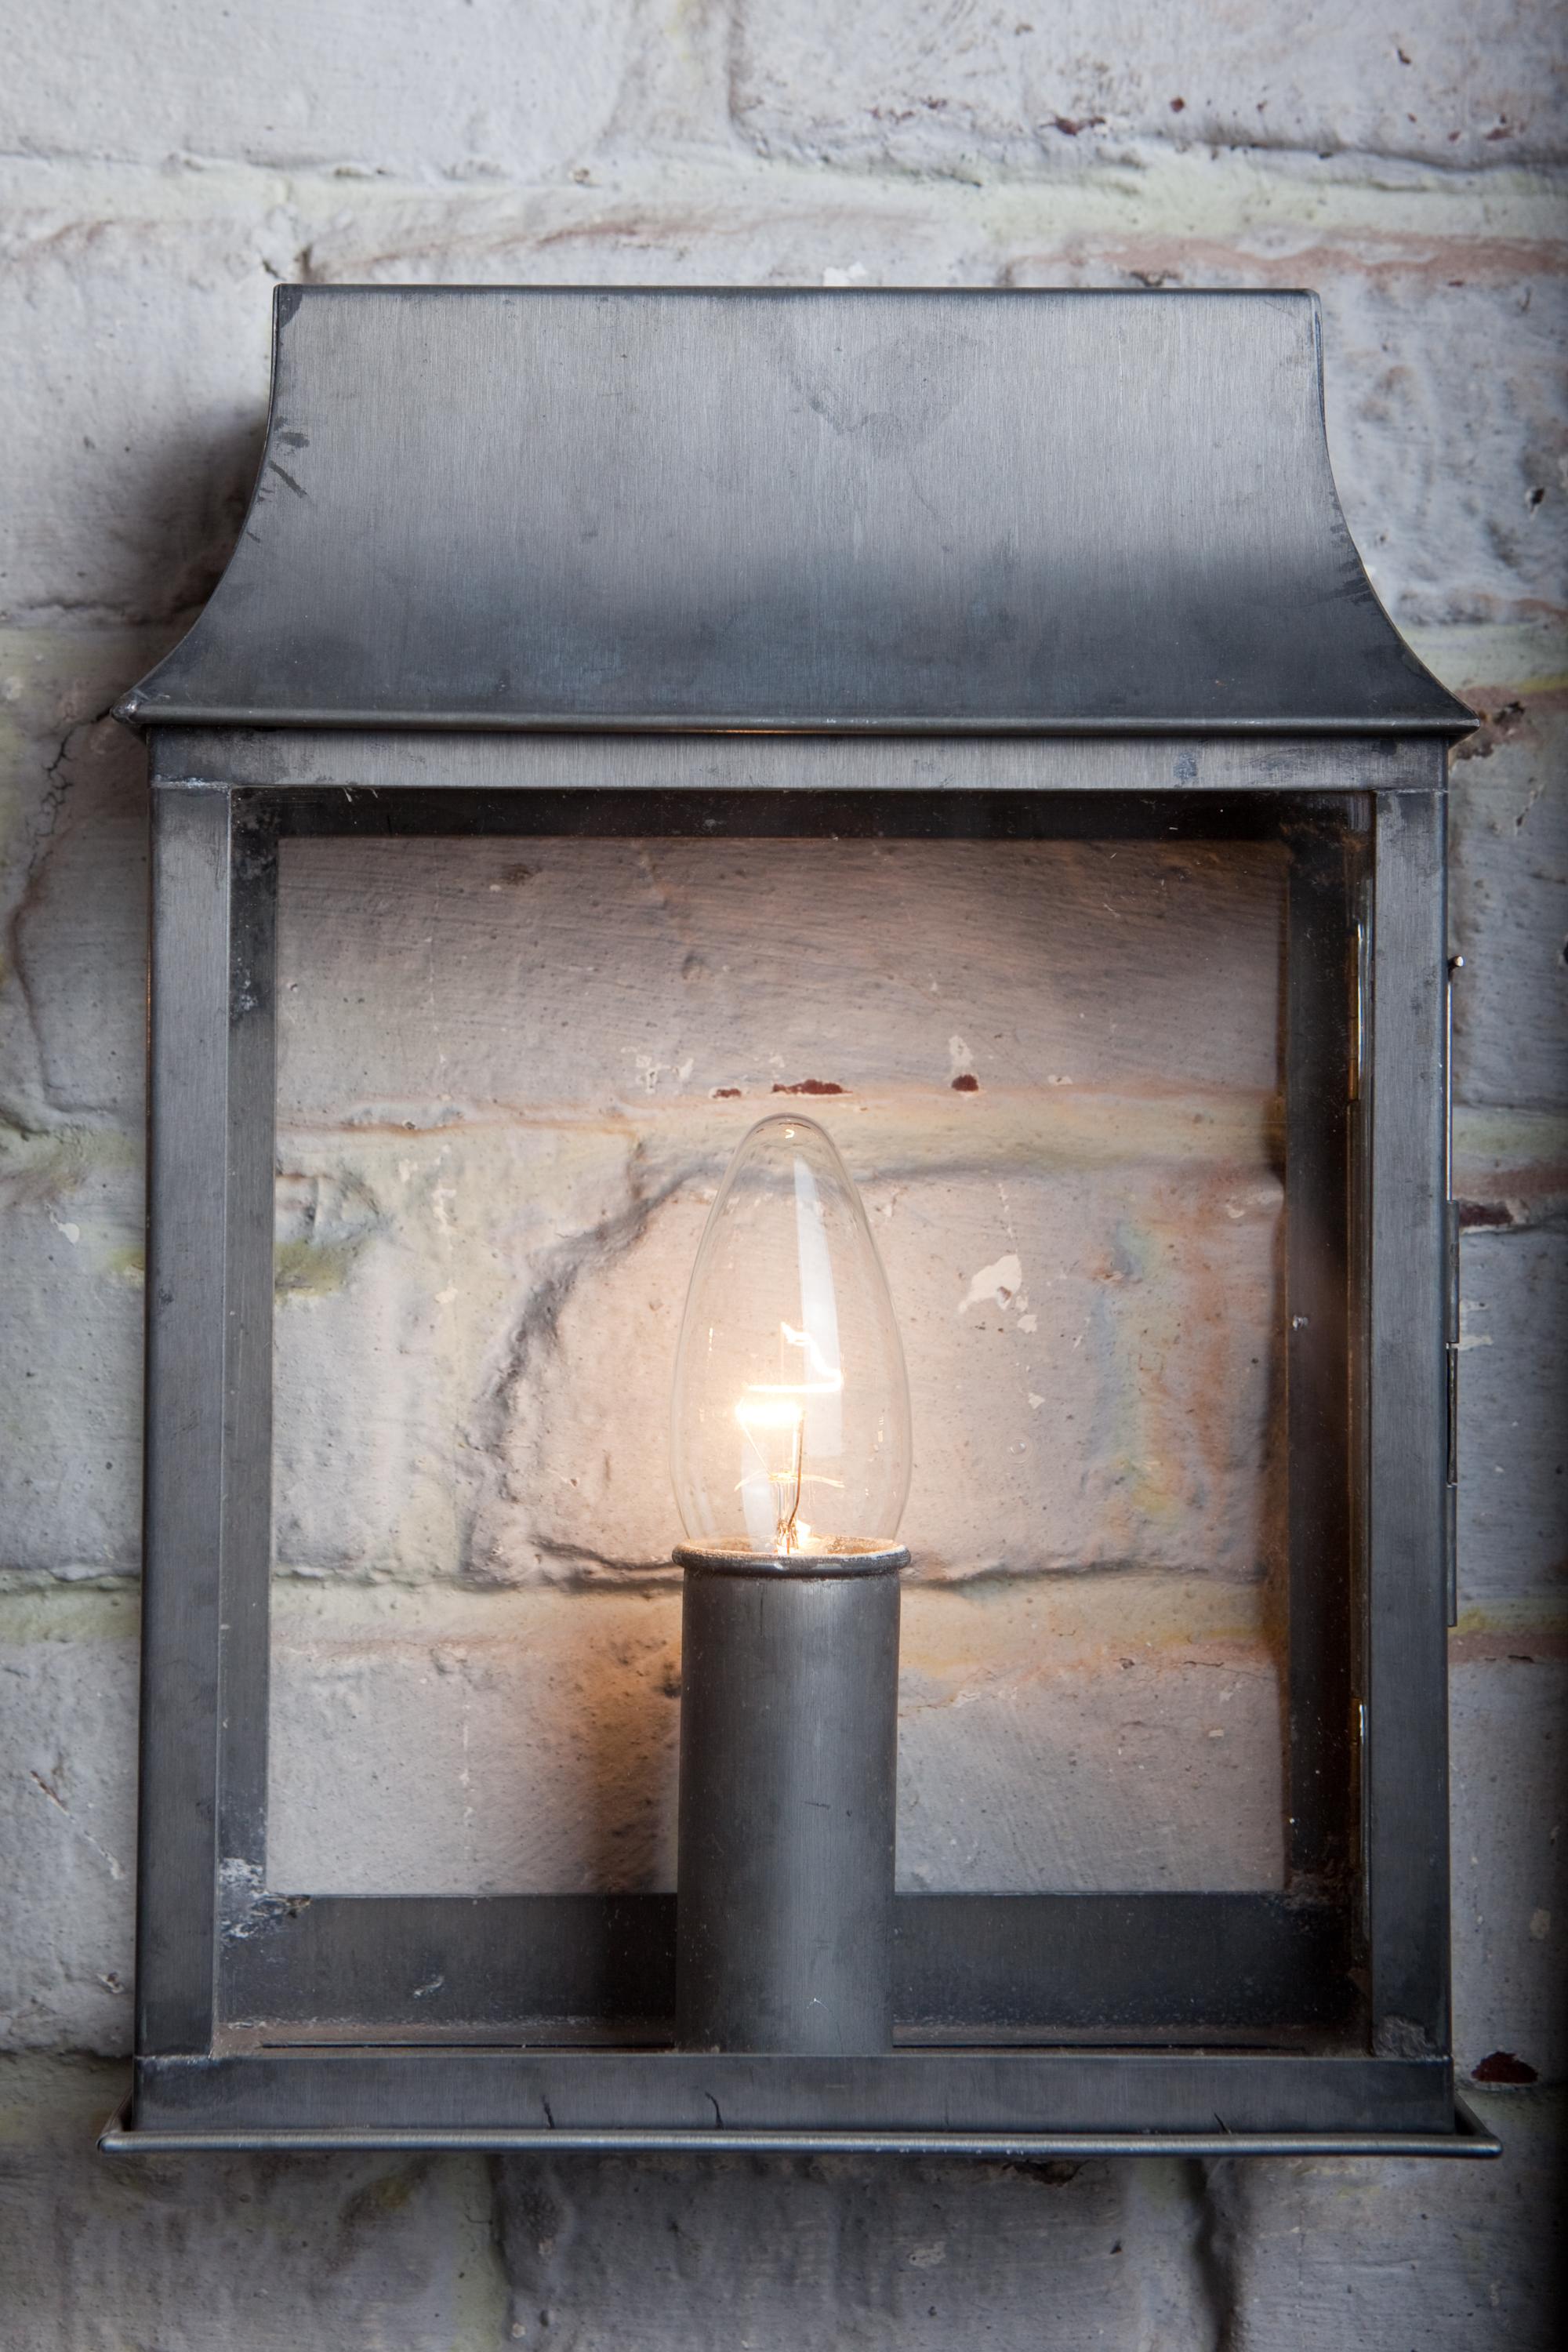 A wall fixture in zinc, glass in front, no backplate. So you can see the wall straight through. With a e14 candle lamp. Both inside or outside. 
Also available in bigger version with 2 lamps. This one only for inside use.